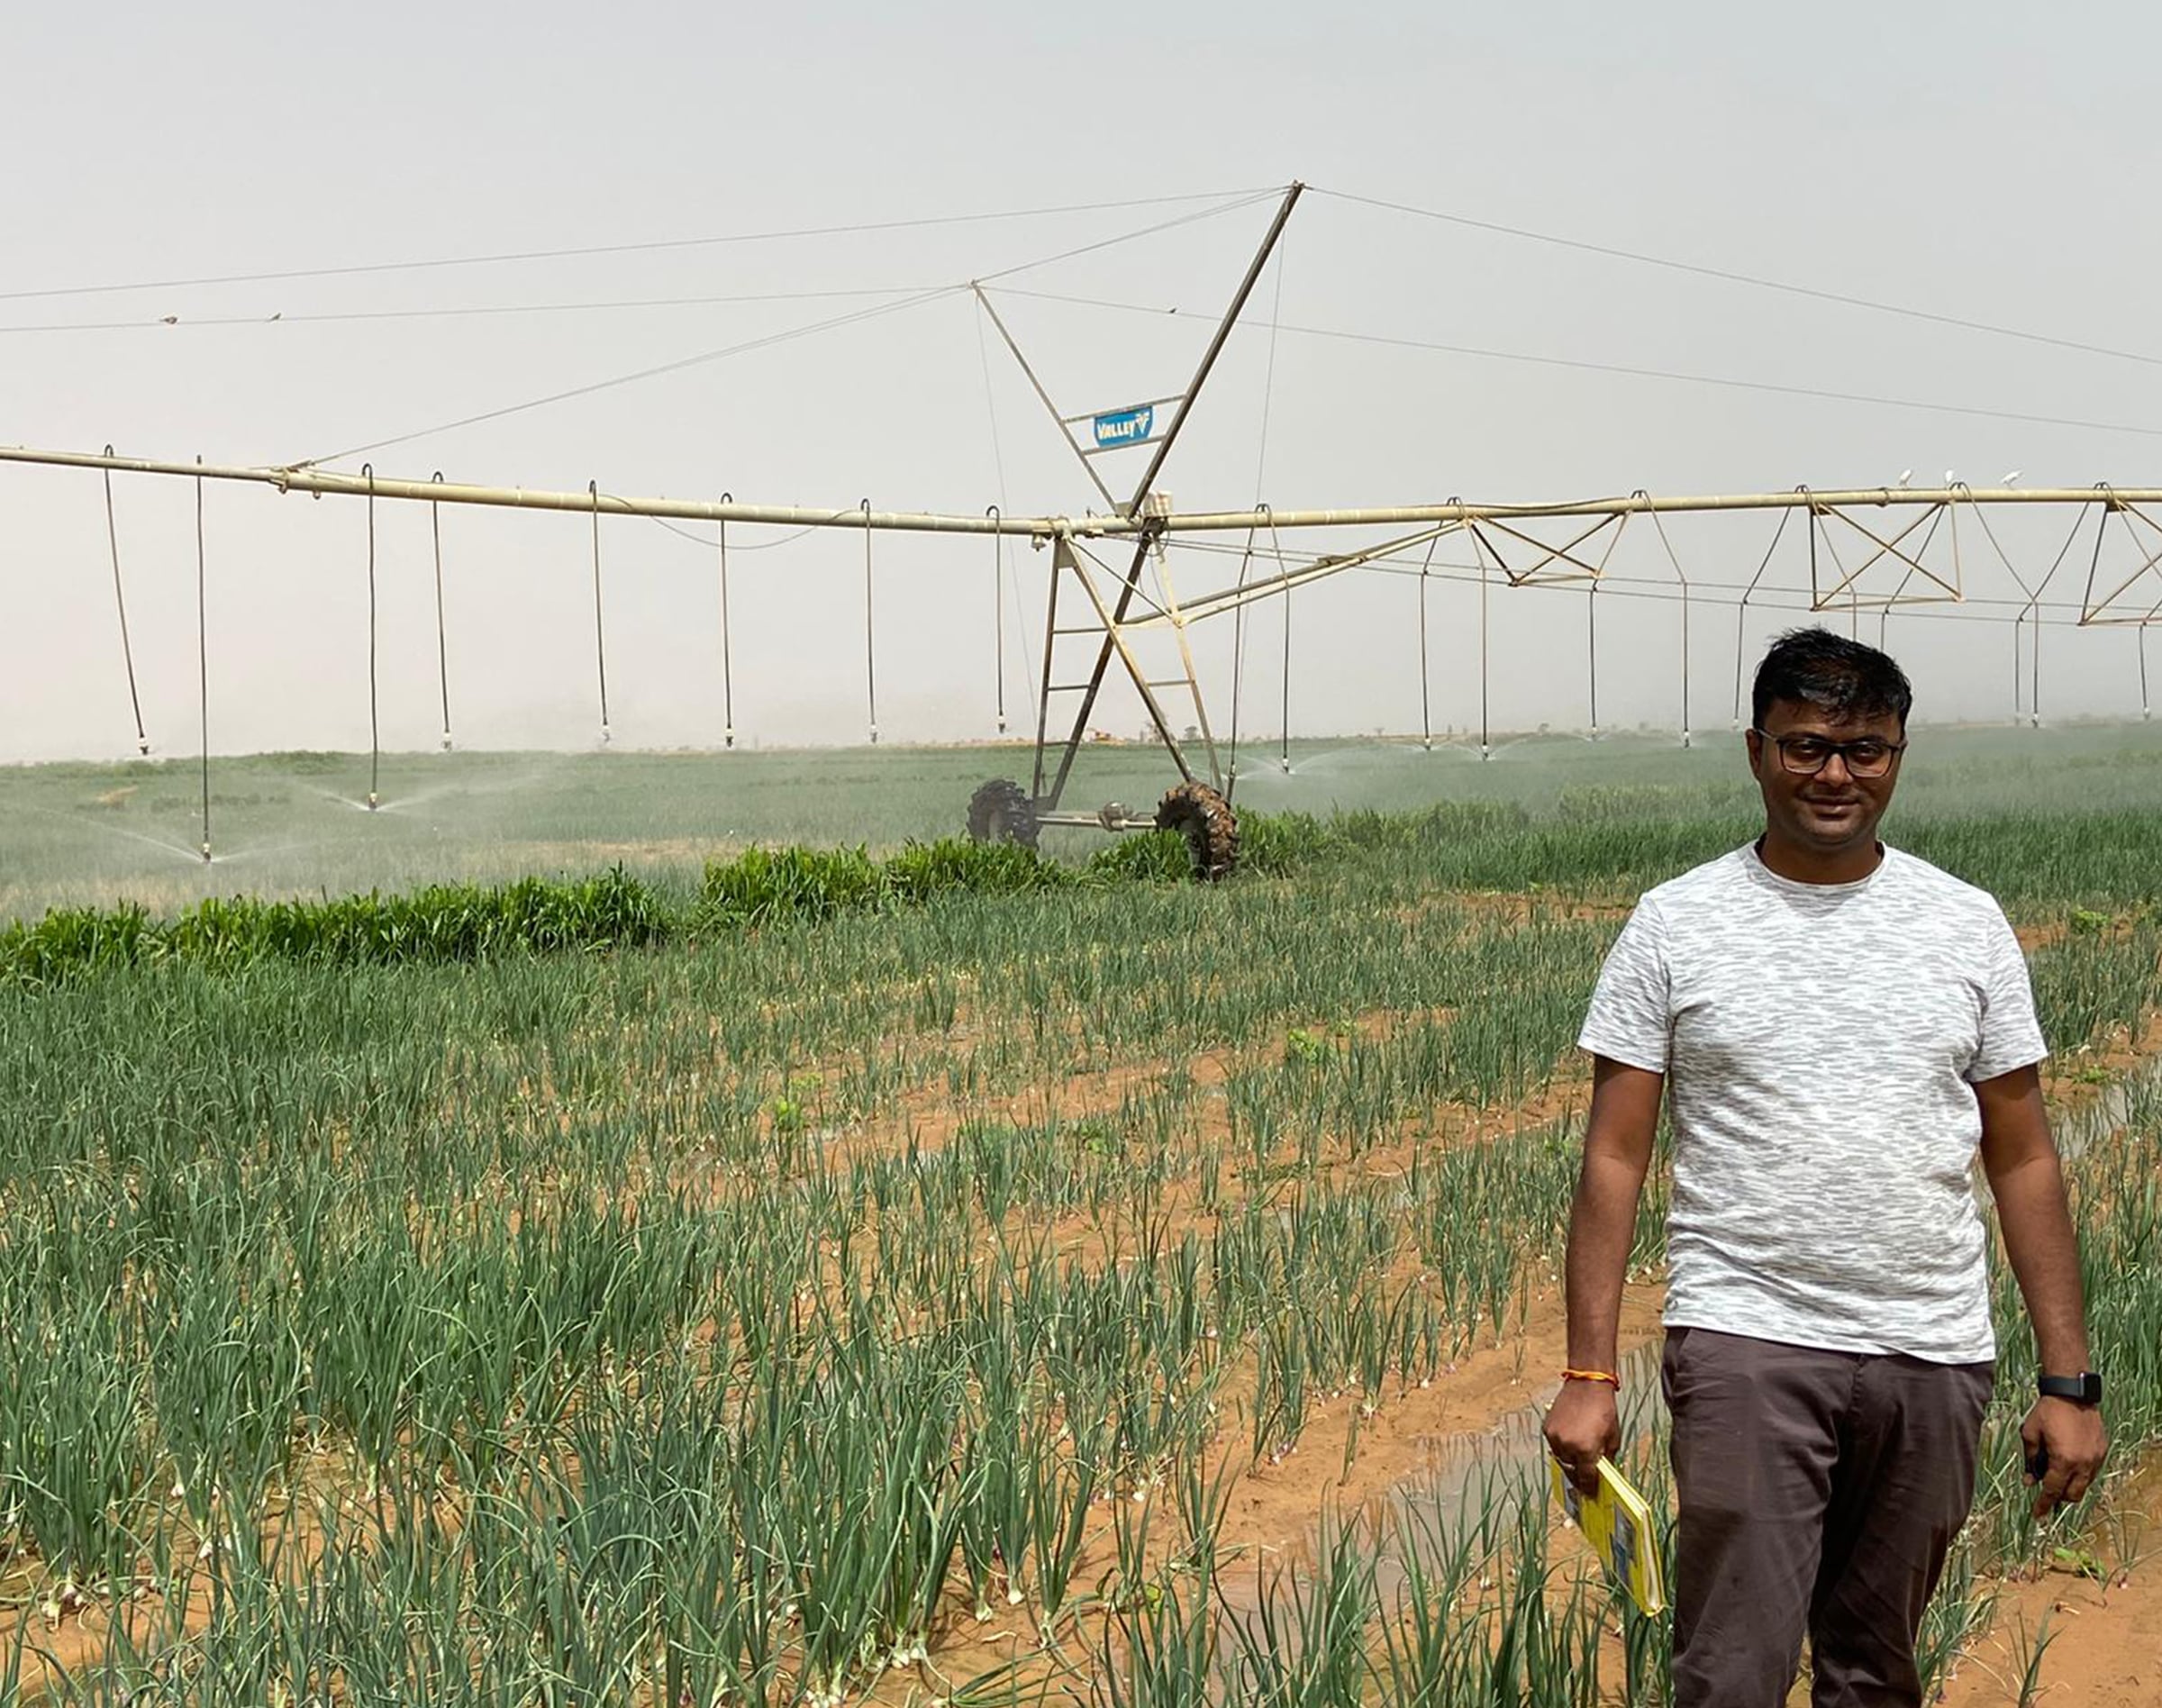 Pivot Irrigation Helps Boost Yields, Feed More People in West Africa